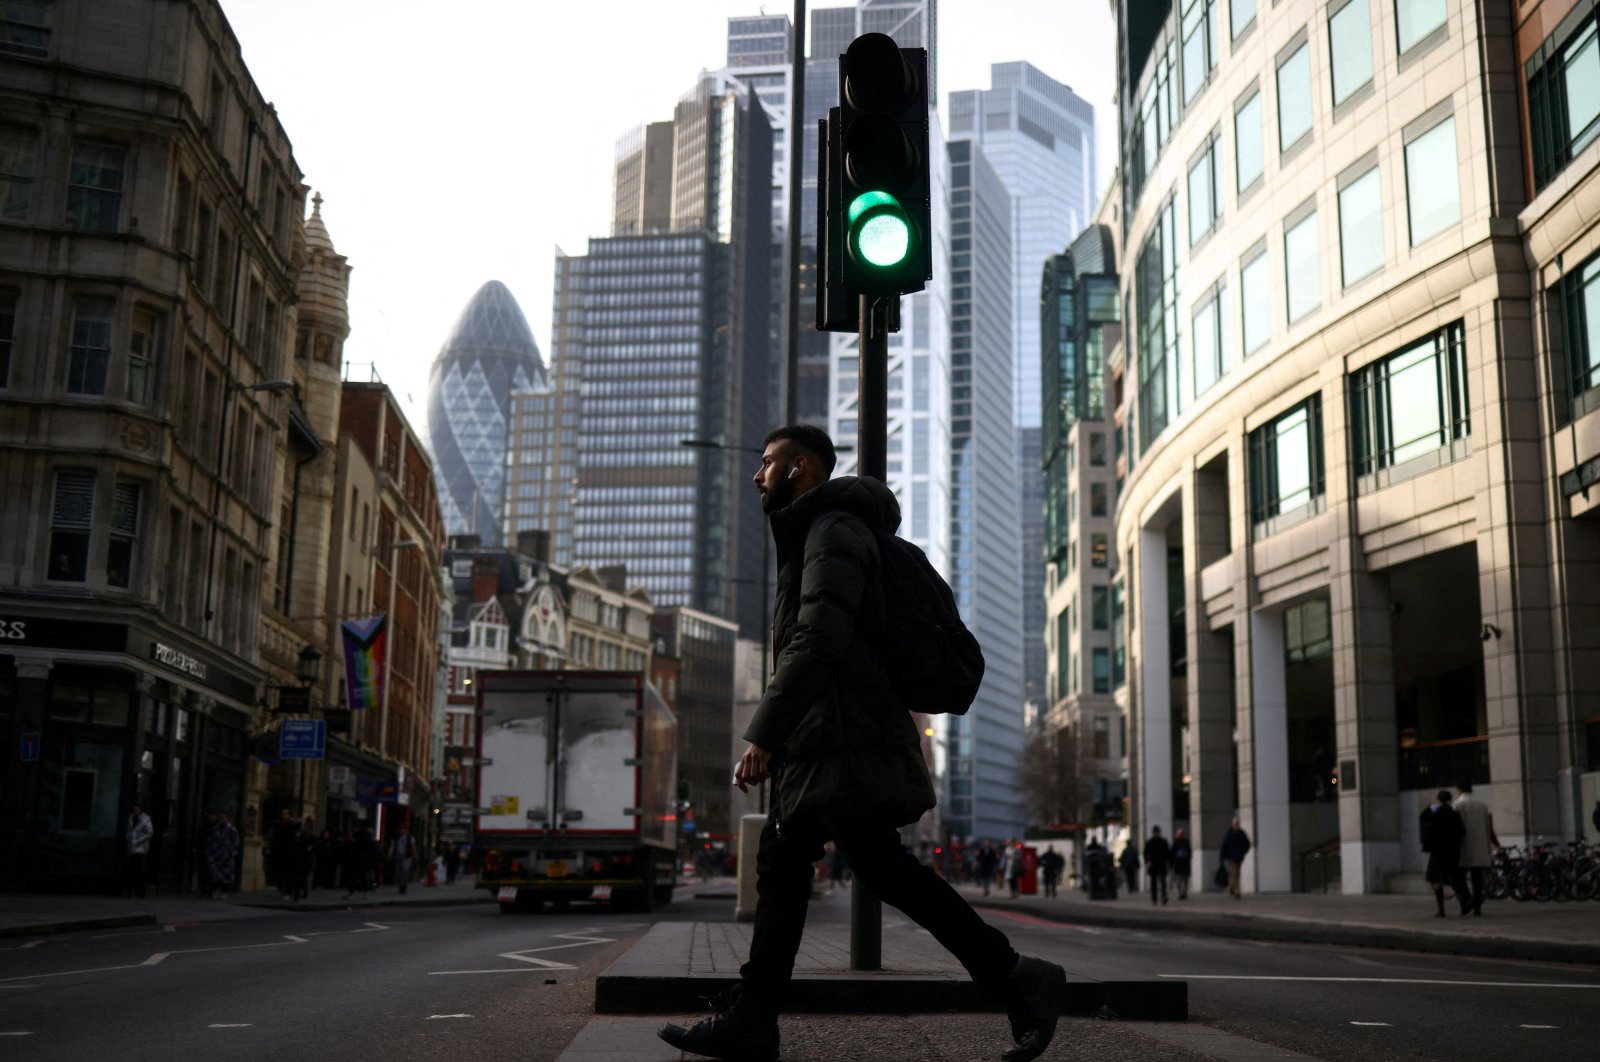 A person walks through the City of London financial district in London, Britain, Feb. 10, 2023. (Reuters Photo)